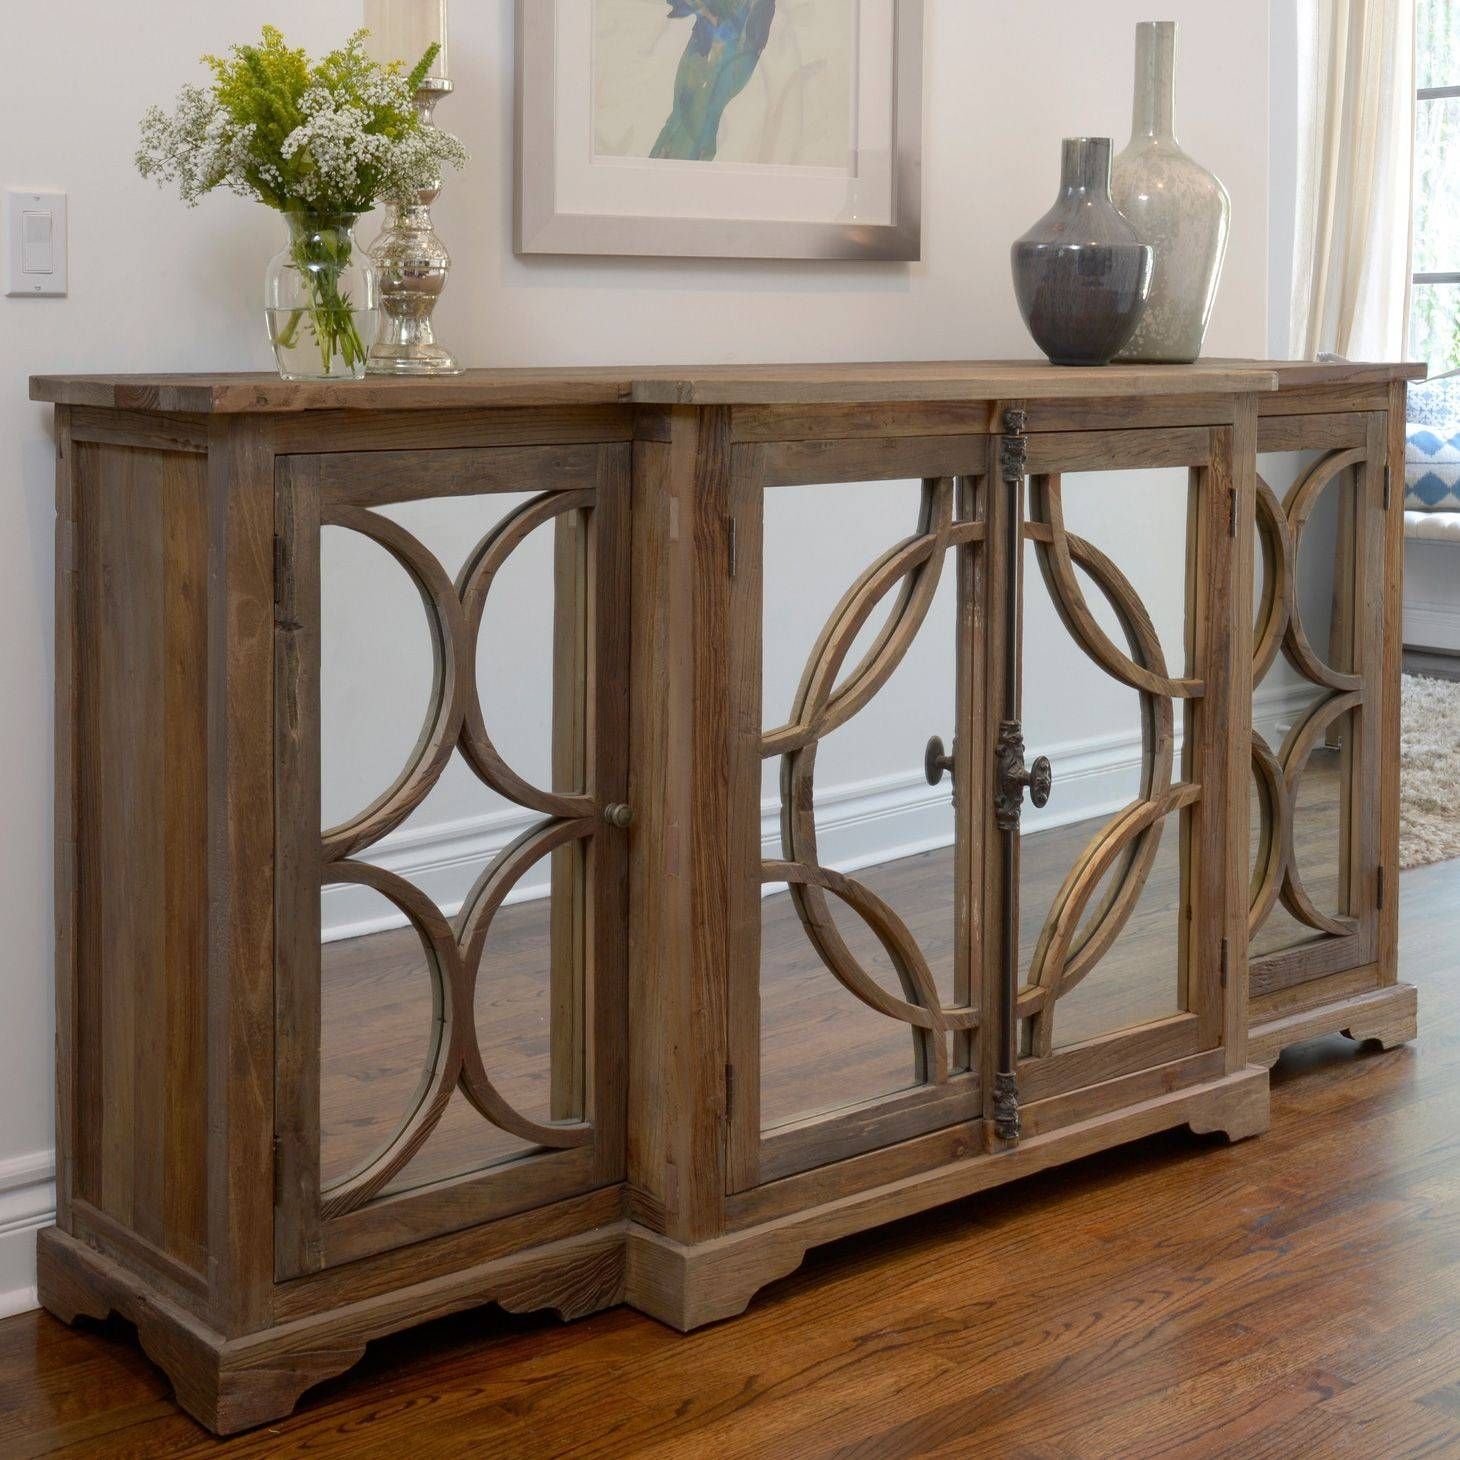 Contemporary Sideboards And Buffets Best Of And Add This Wood Pertaining To Most Popular Mirrored Buffet Sideboards (View 10 of 15)